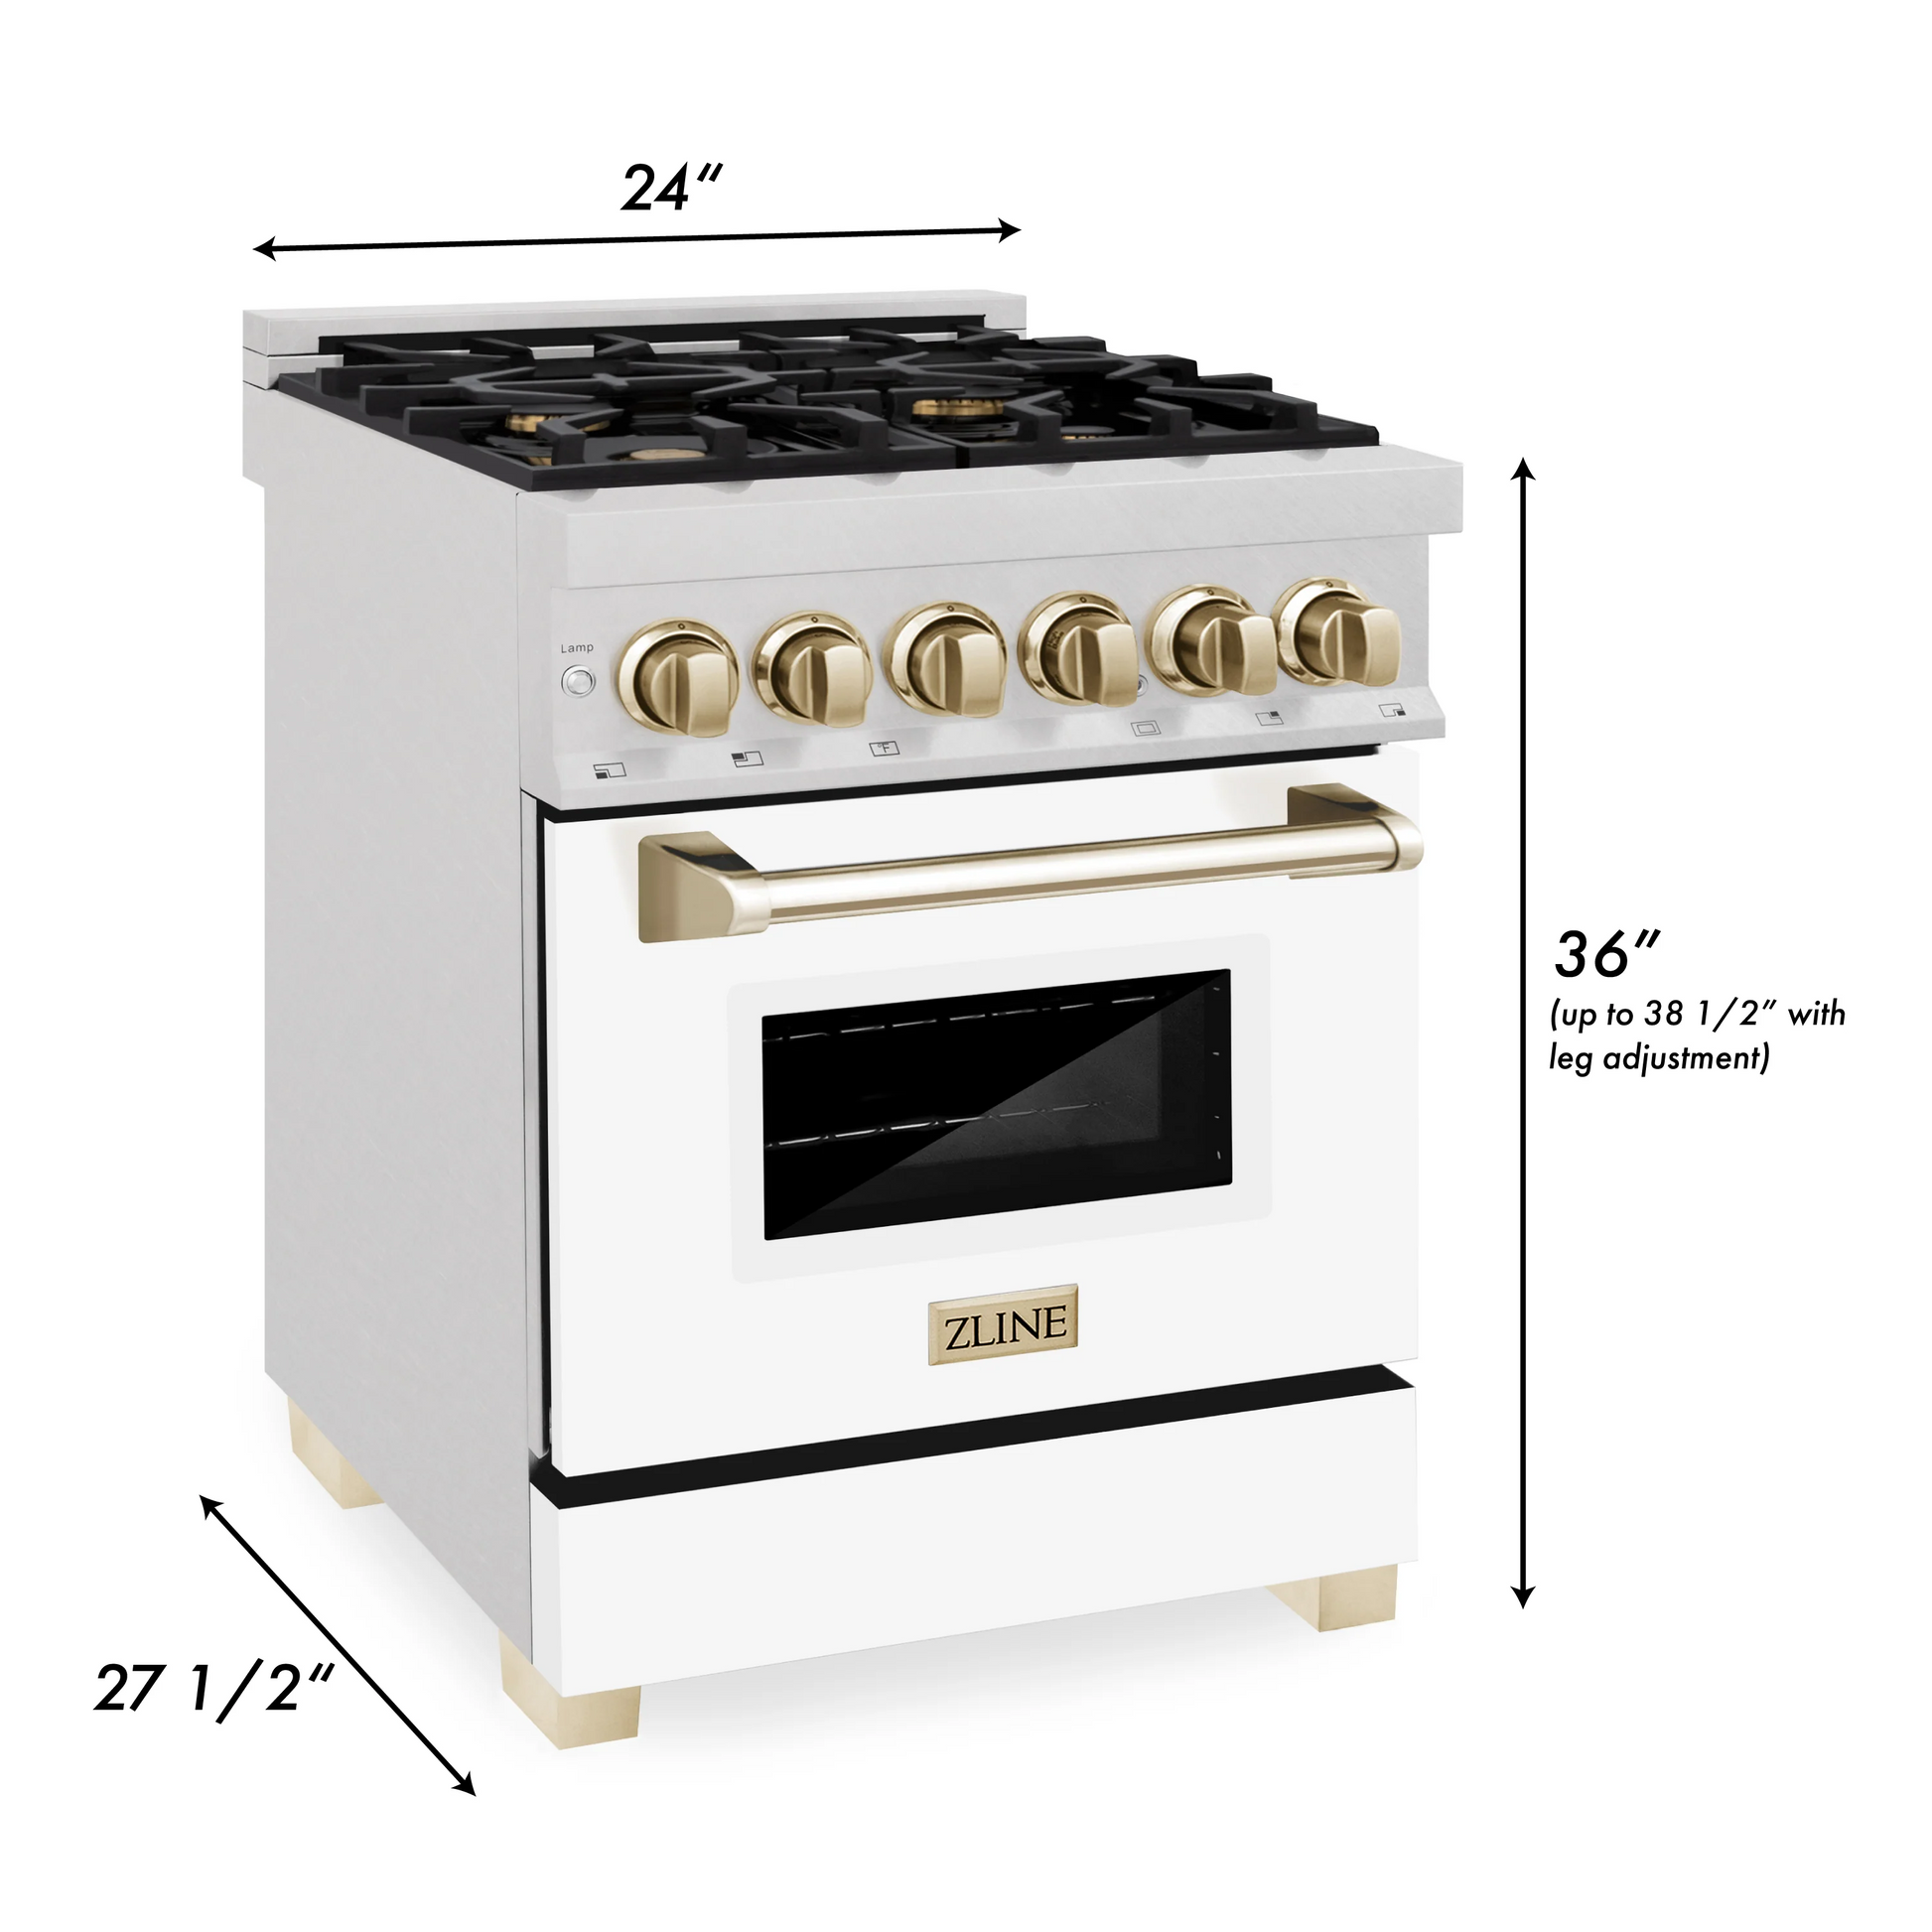 ZLINE Autograph Edition 30 4.0 Cu. ft. Dual Fuel Range in DuraSnow Stainless Steel with White Matte Door and Gold Accents